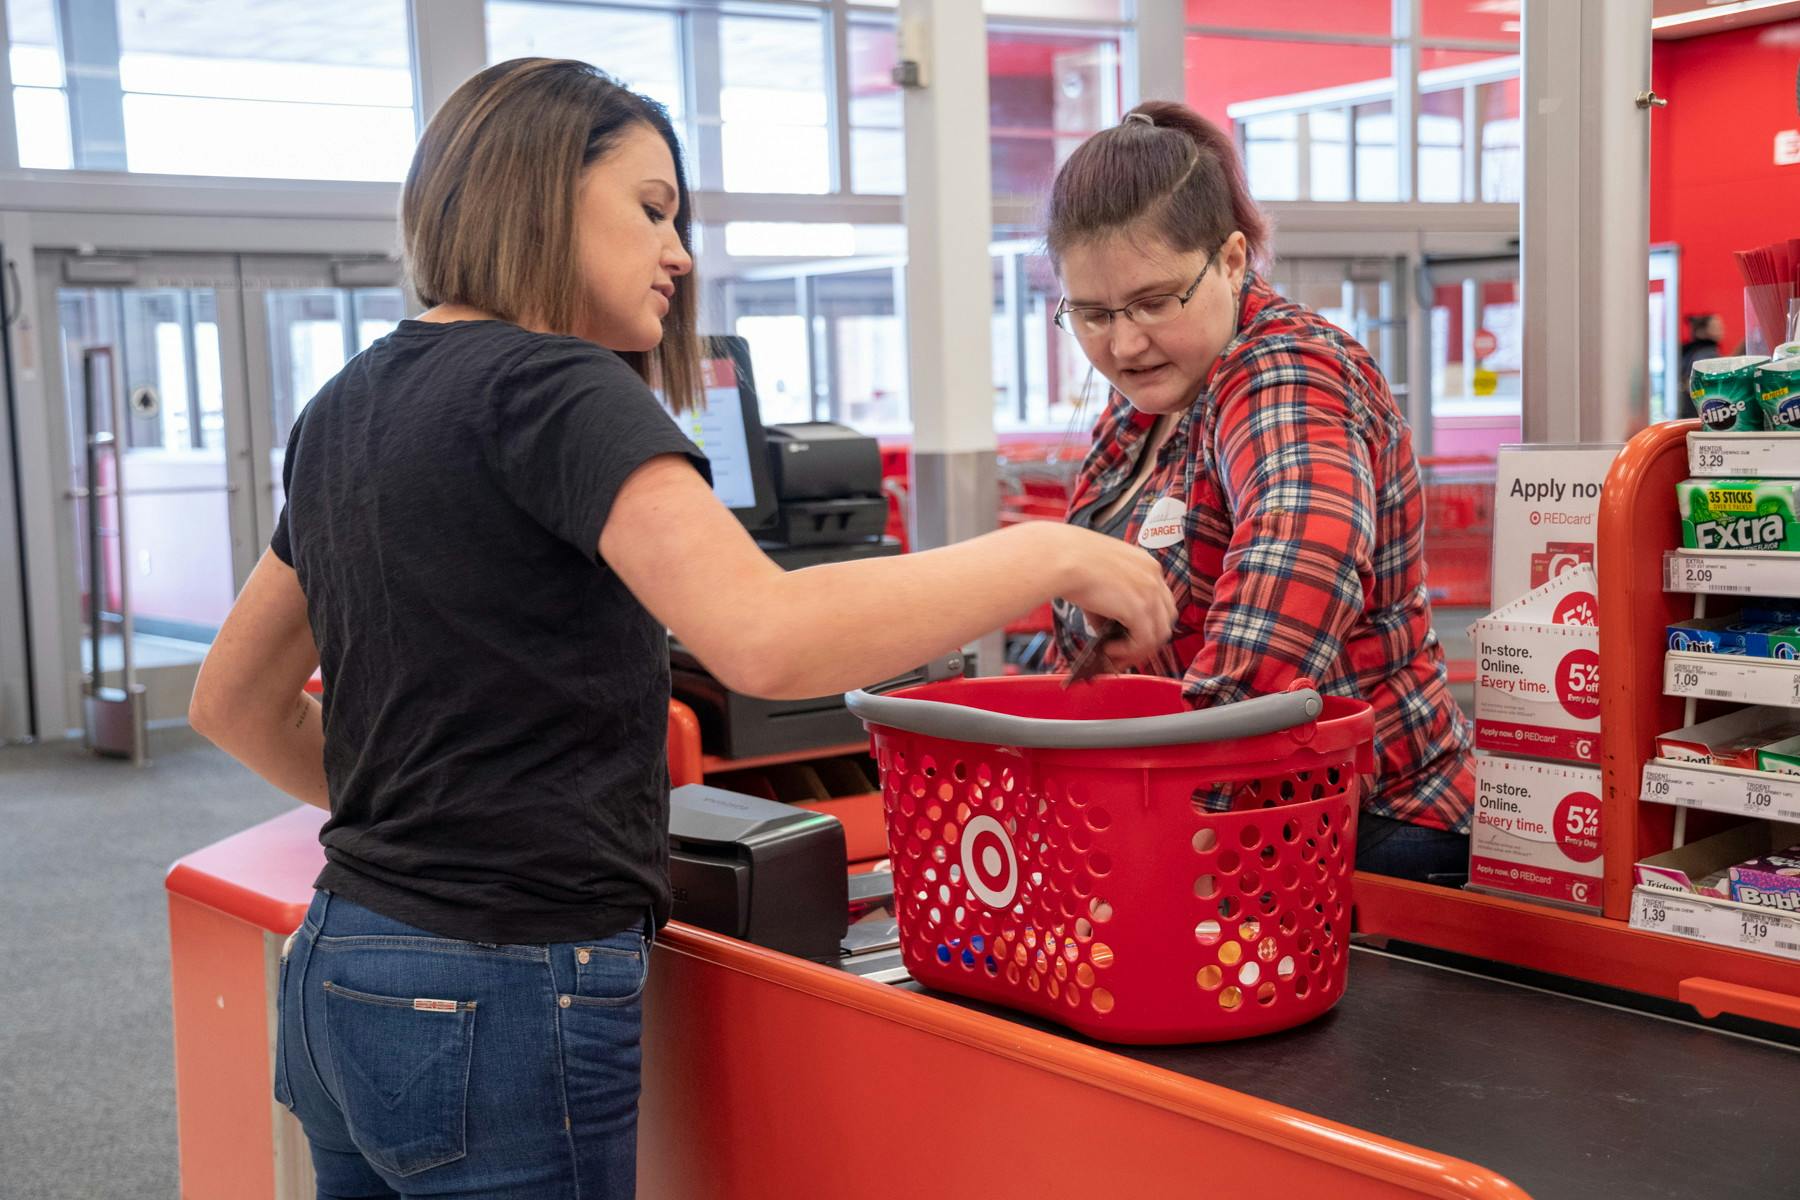 A woman standing at the Target checkout, both her and the cashier reaching to take something out of the Target hand basket sitting on the conveyer belt.